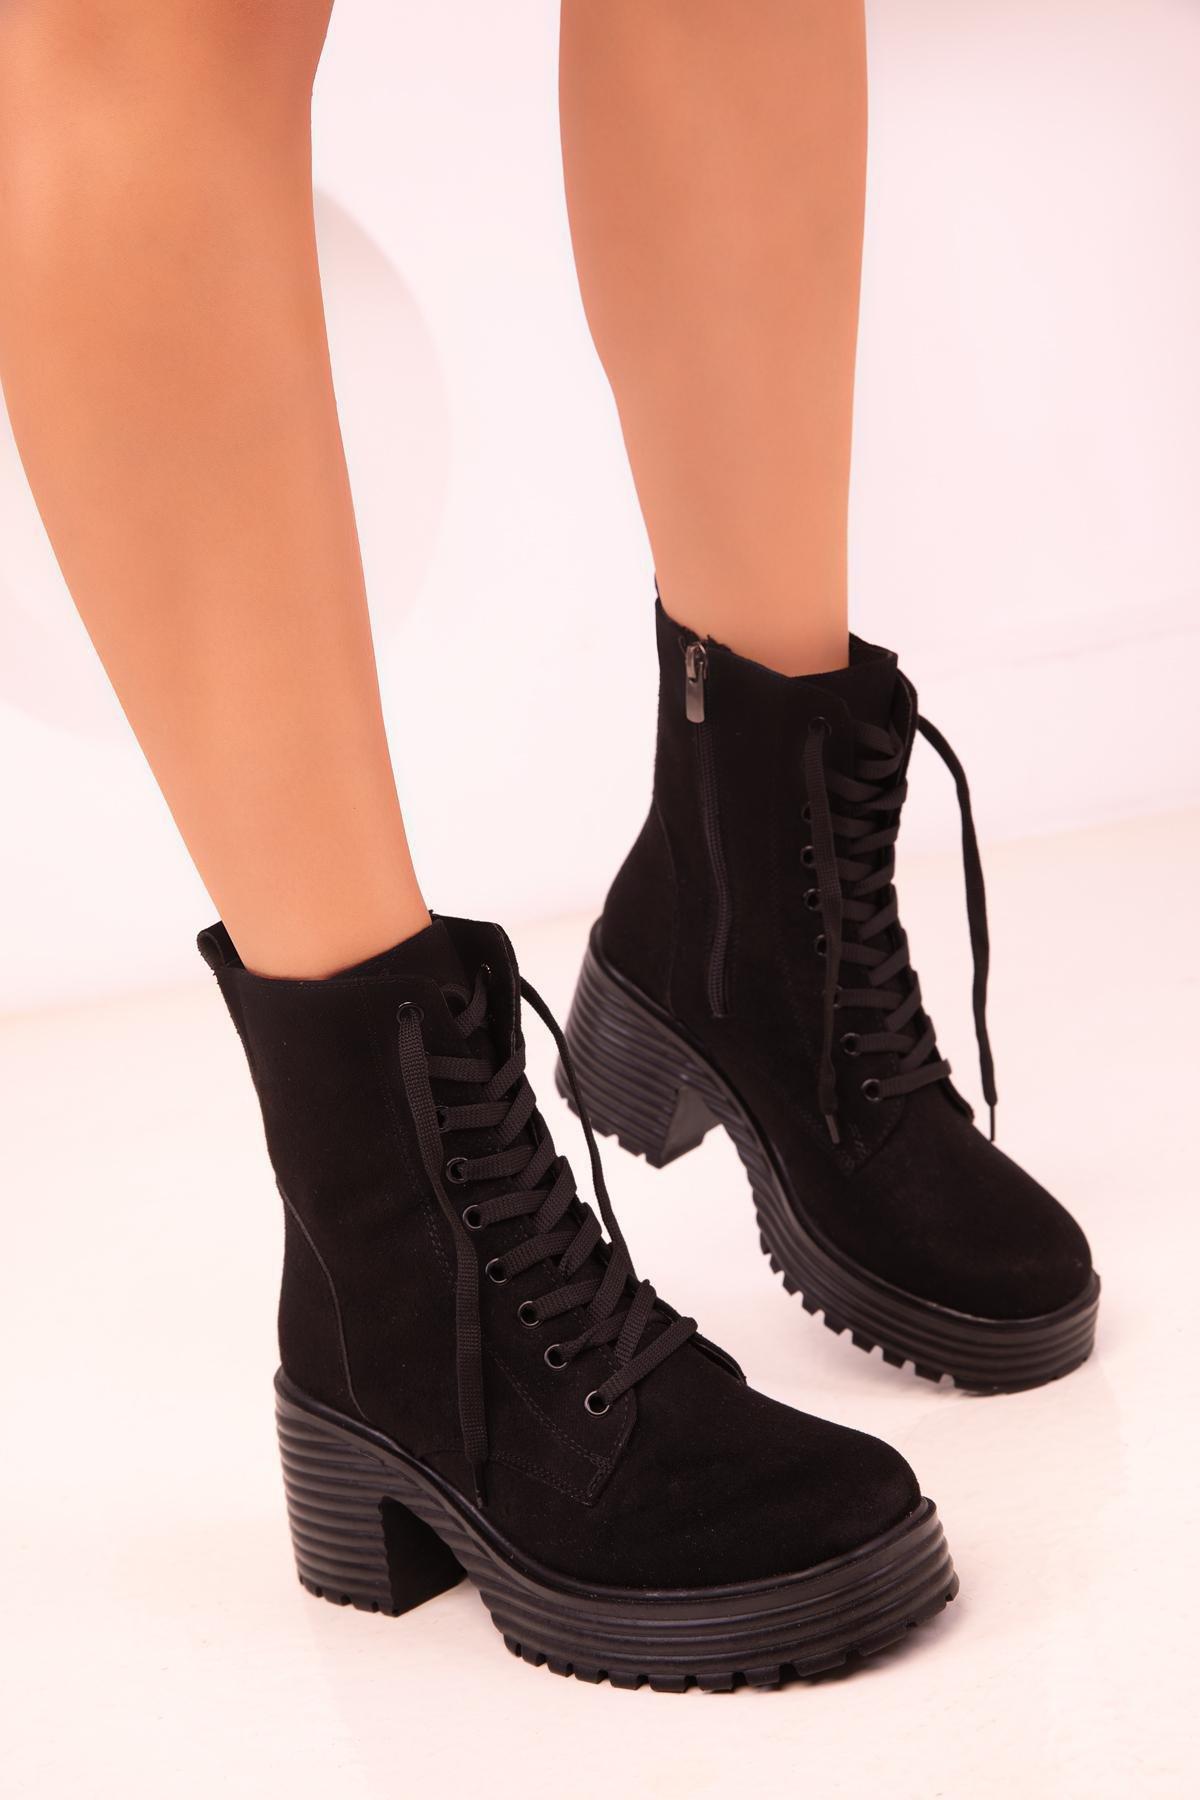 SOHO - Black Lace-Up Heels Suede Boots